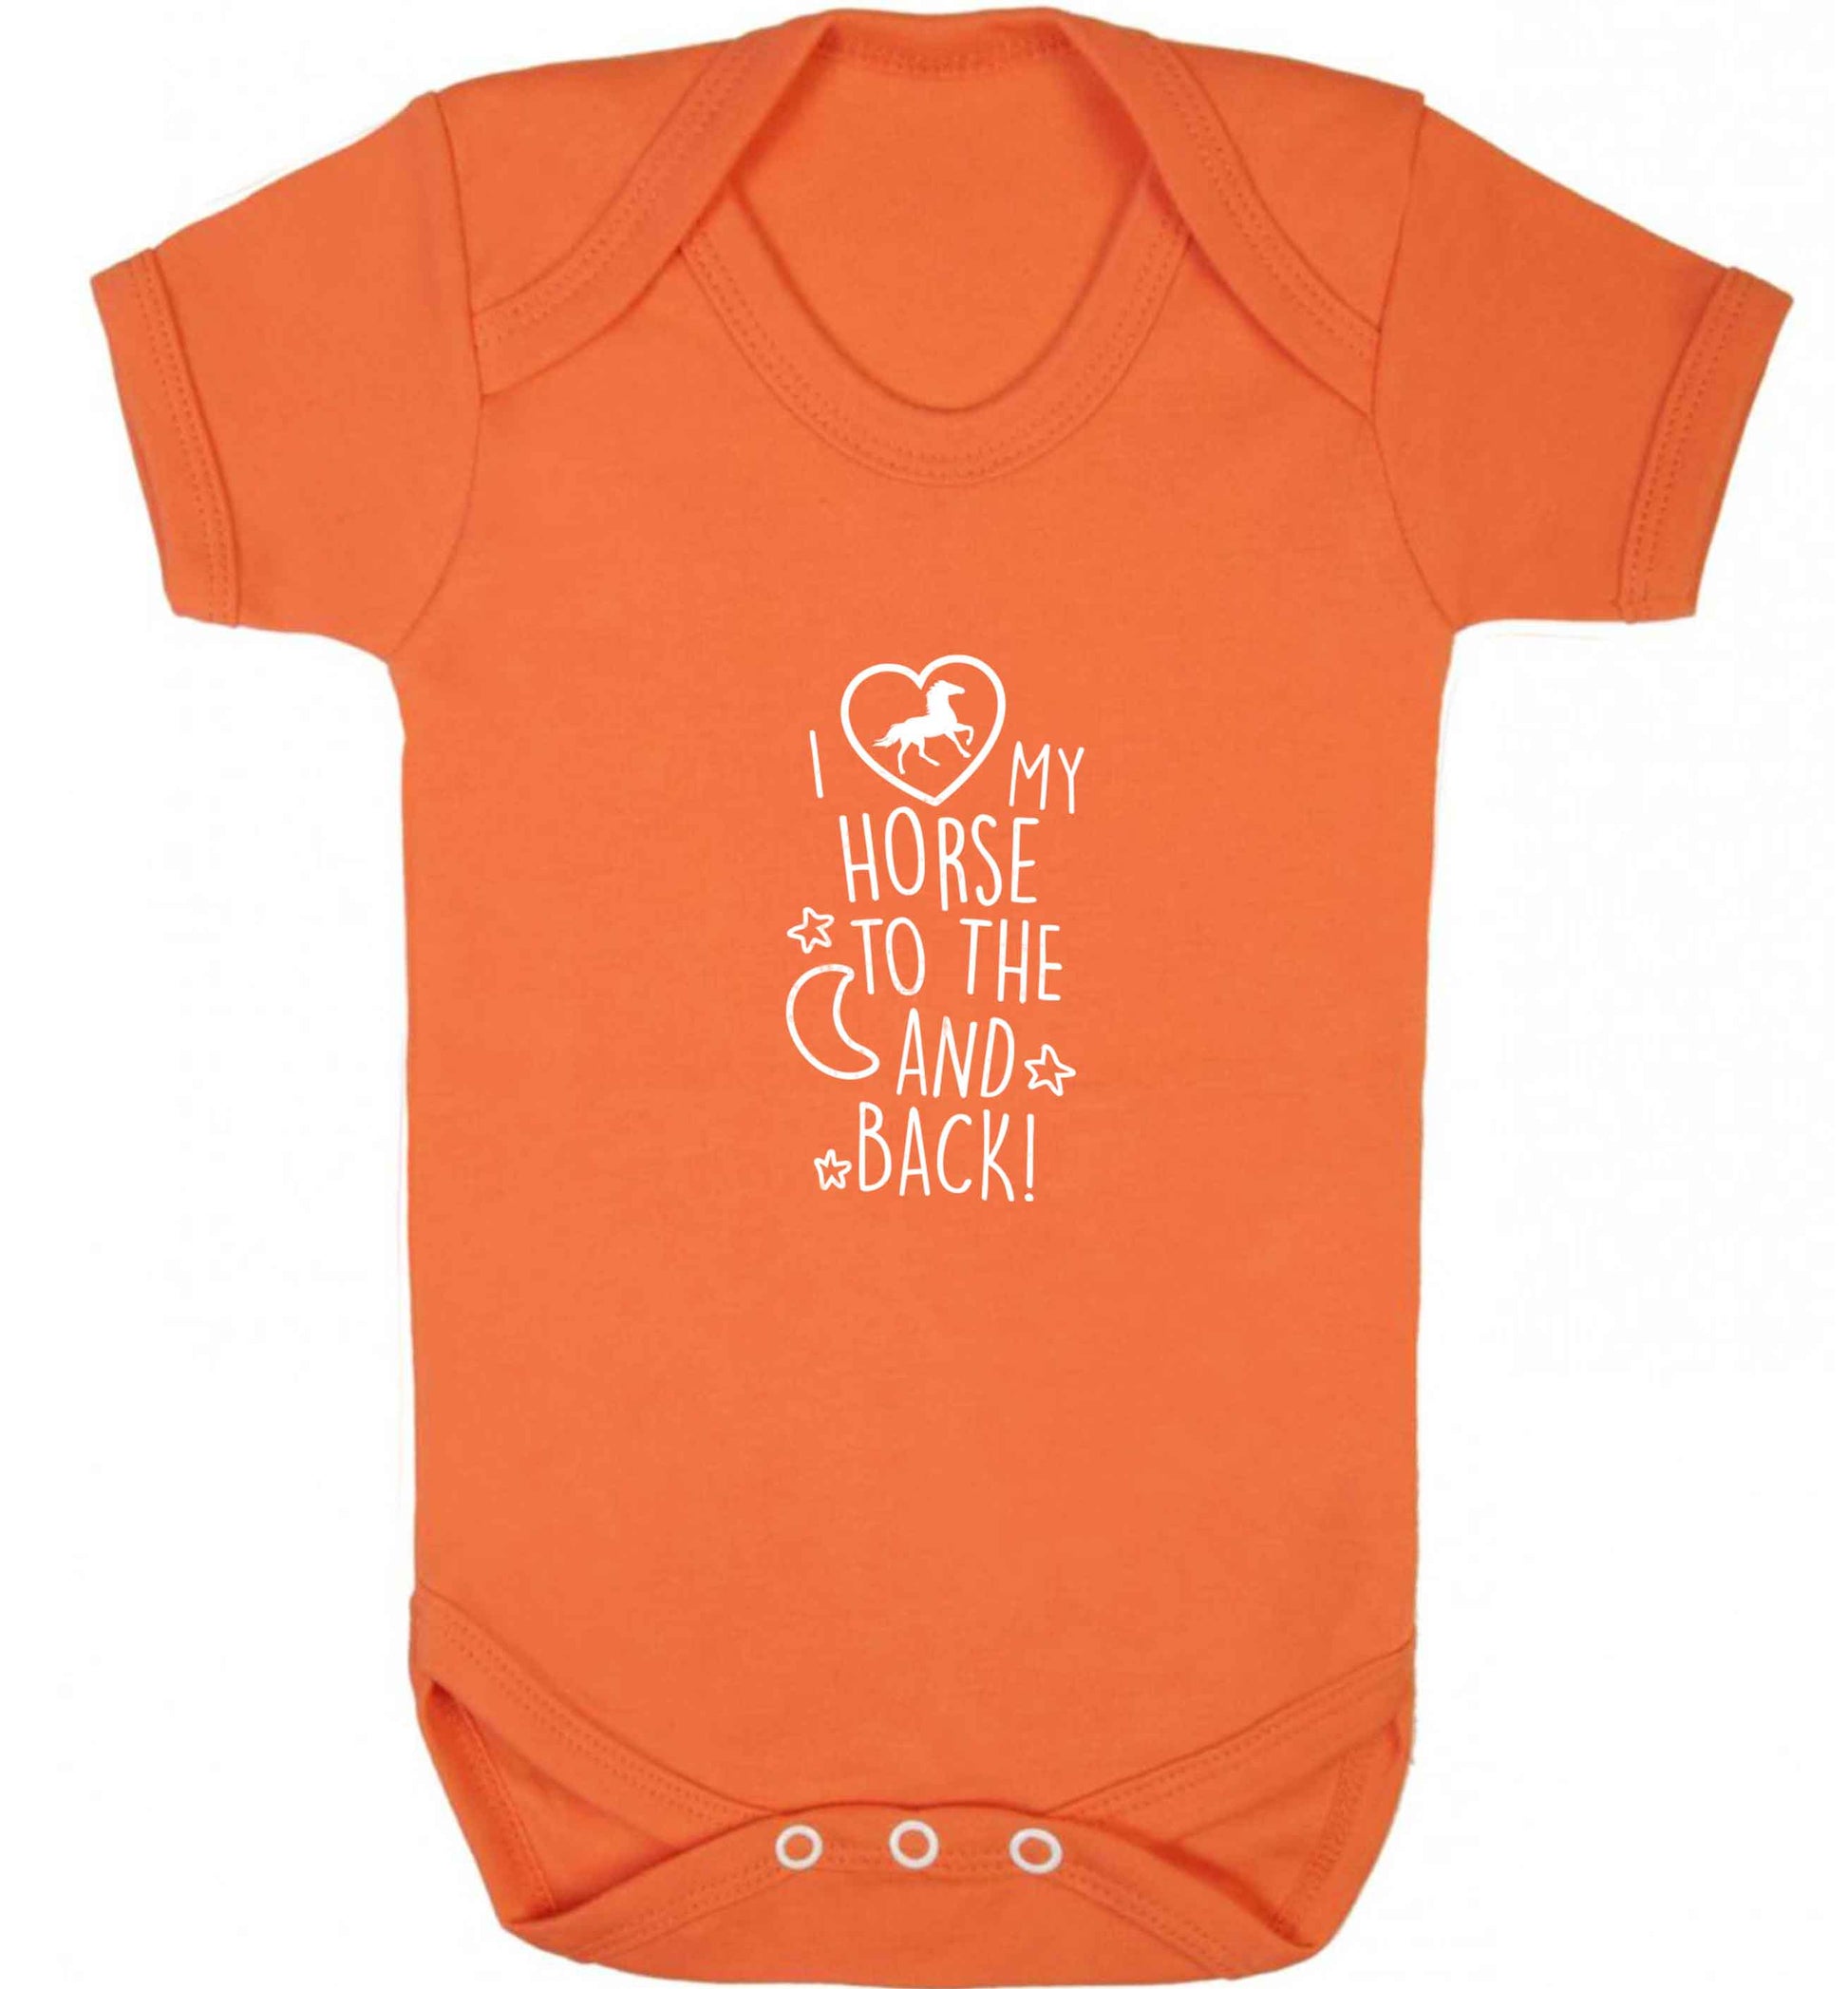 I love my horse to the moon and back baby vest orange 18-24 months